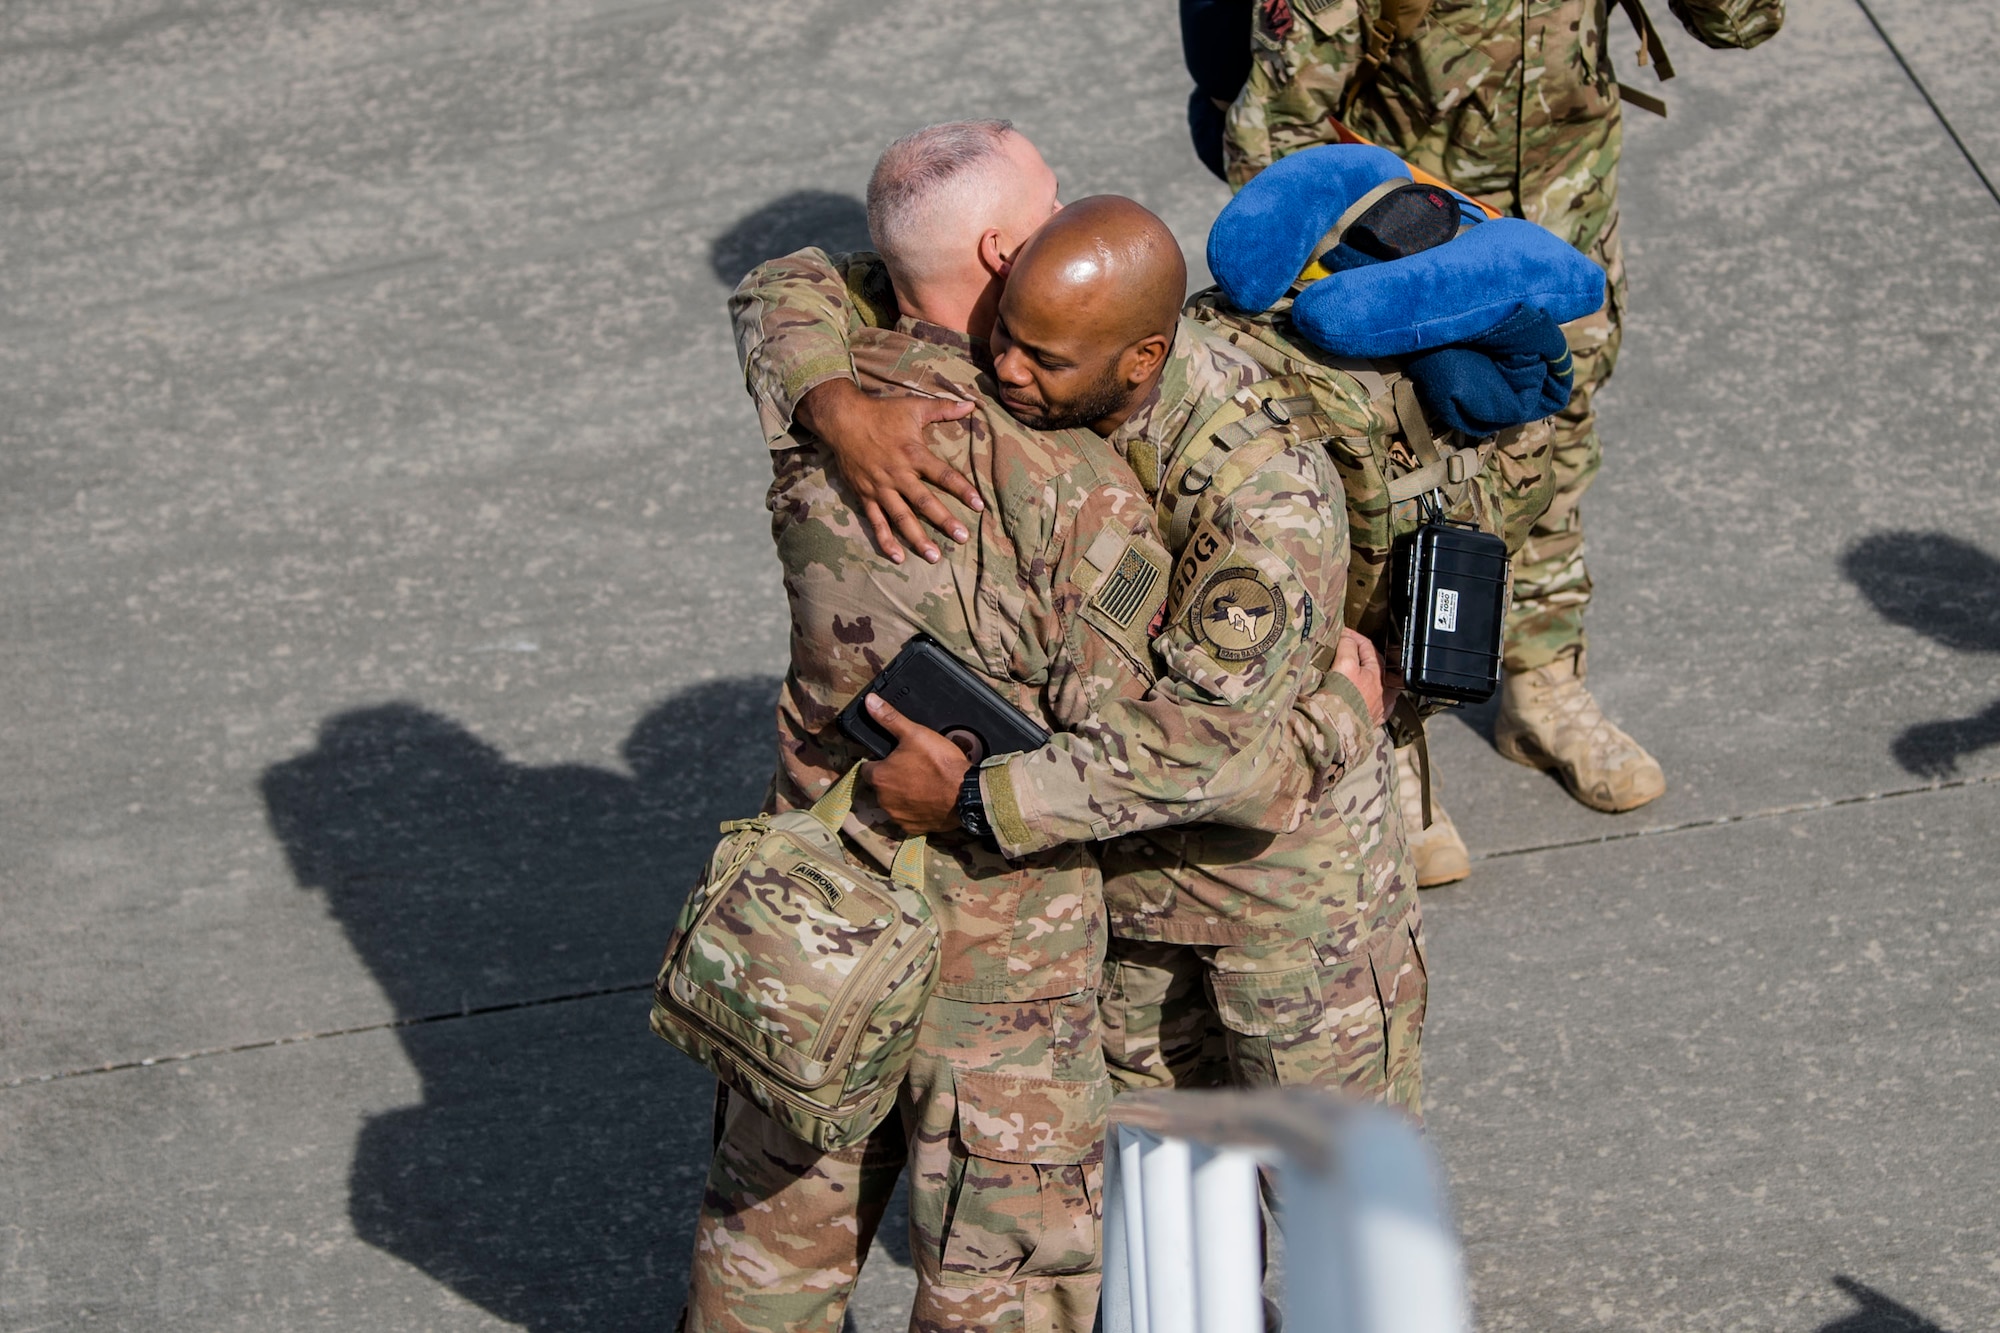 Chief Master Sgt. Larry Mays, 824th Base Defense Squadron (BDS) security forces manager, hugs Tech. Sgt. Justin Amburgey, 824th BDS squad leader, Oct. 24, 2018, at Moody Air Force Base, Ga. The 822d, 823d and 824th Base Defense Squadrons (BDS) provide high-risk force protection and integrated base defense for expeditionary air forces. Airmen from the 823d BDS just returned home from conducting relief-in-place in the United States Africa Command theater while Airmen from the 824th BDS took their place. (U.S. Air Force photo by Airman Taryn Butler)